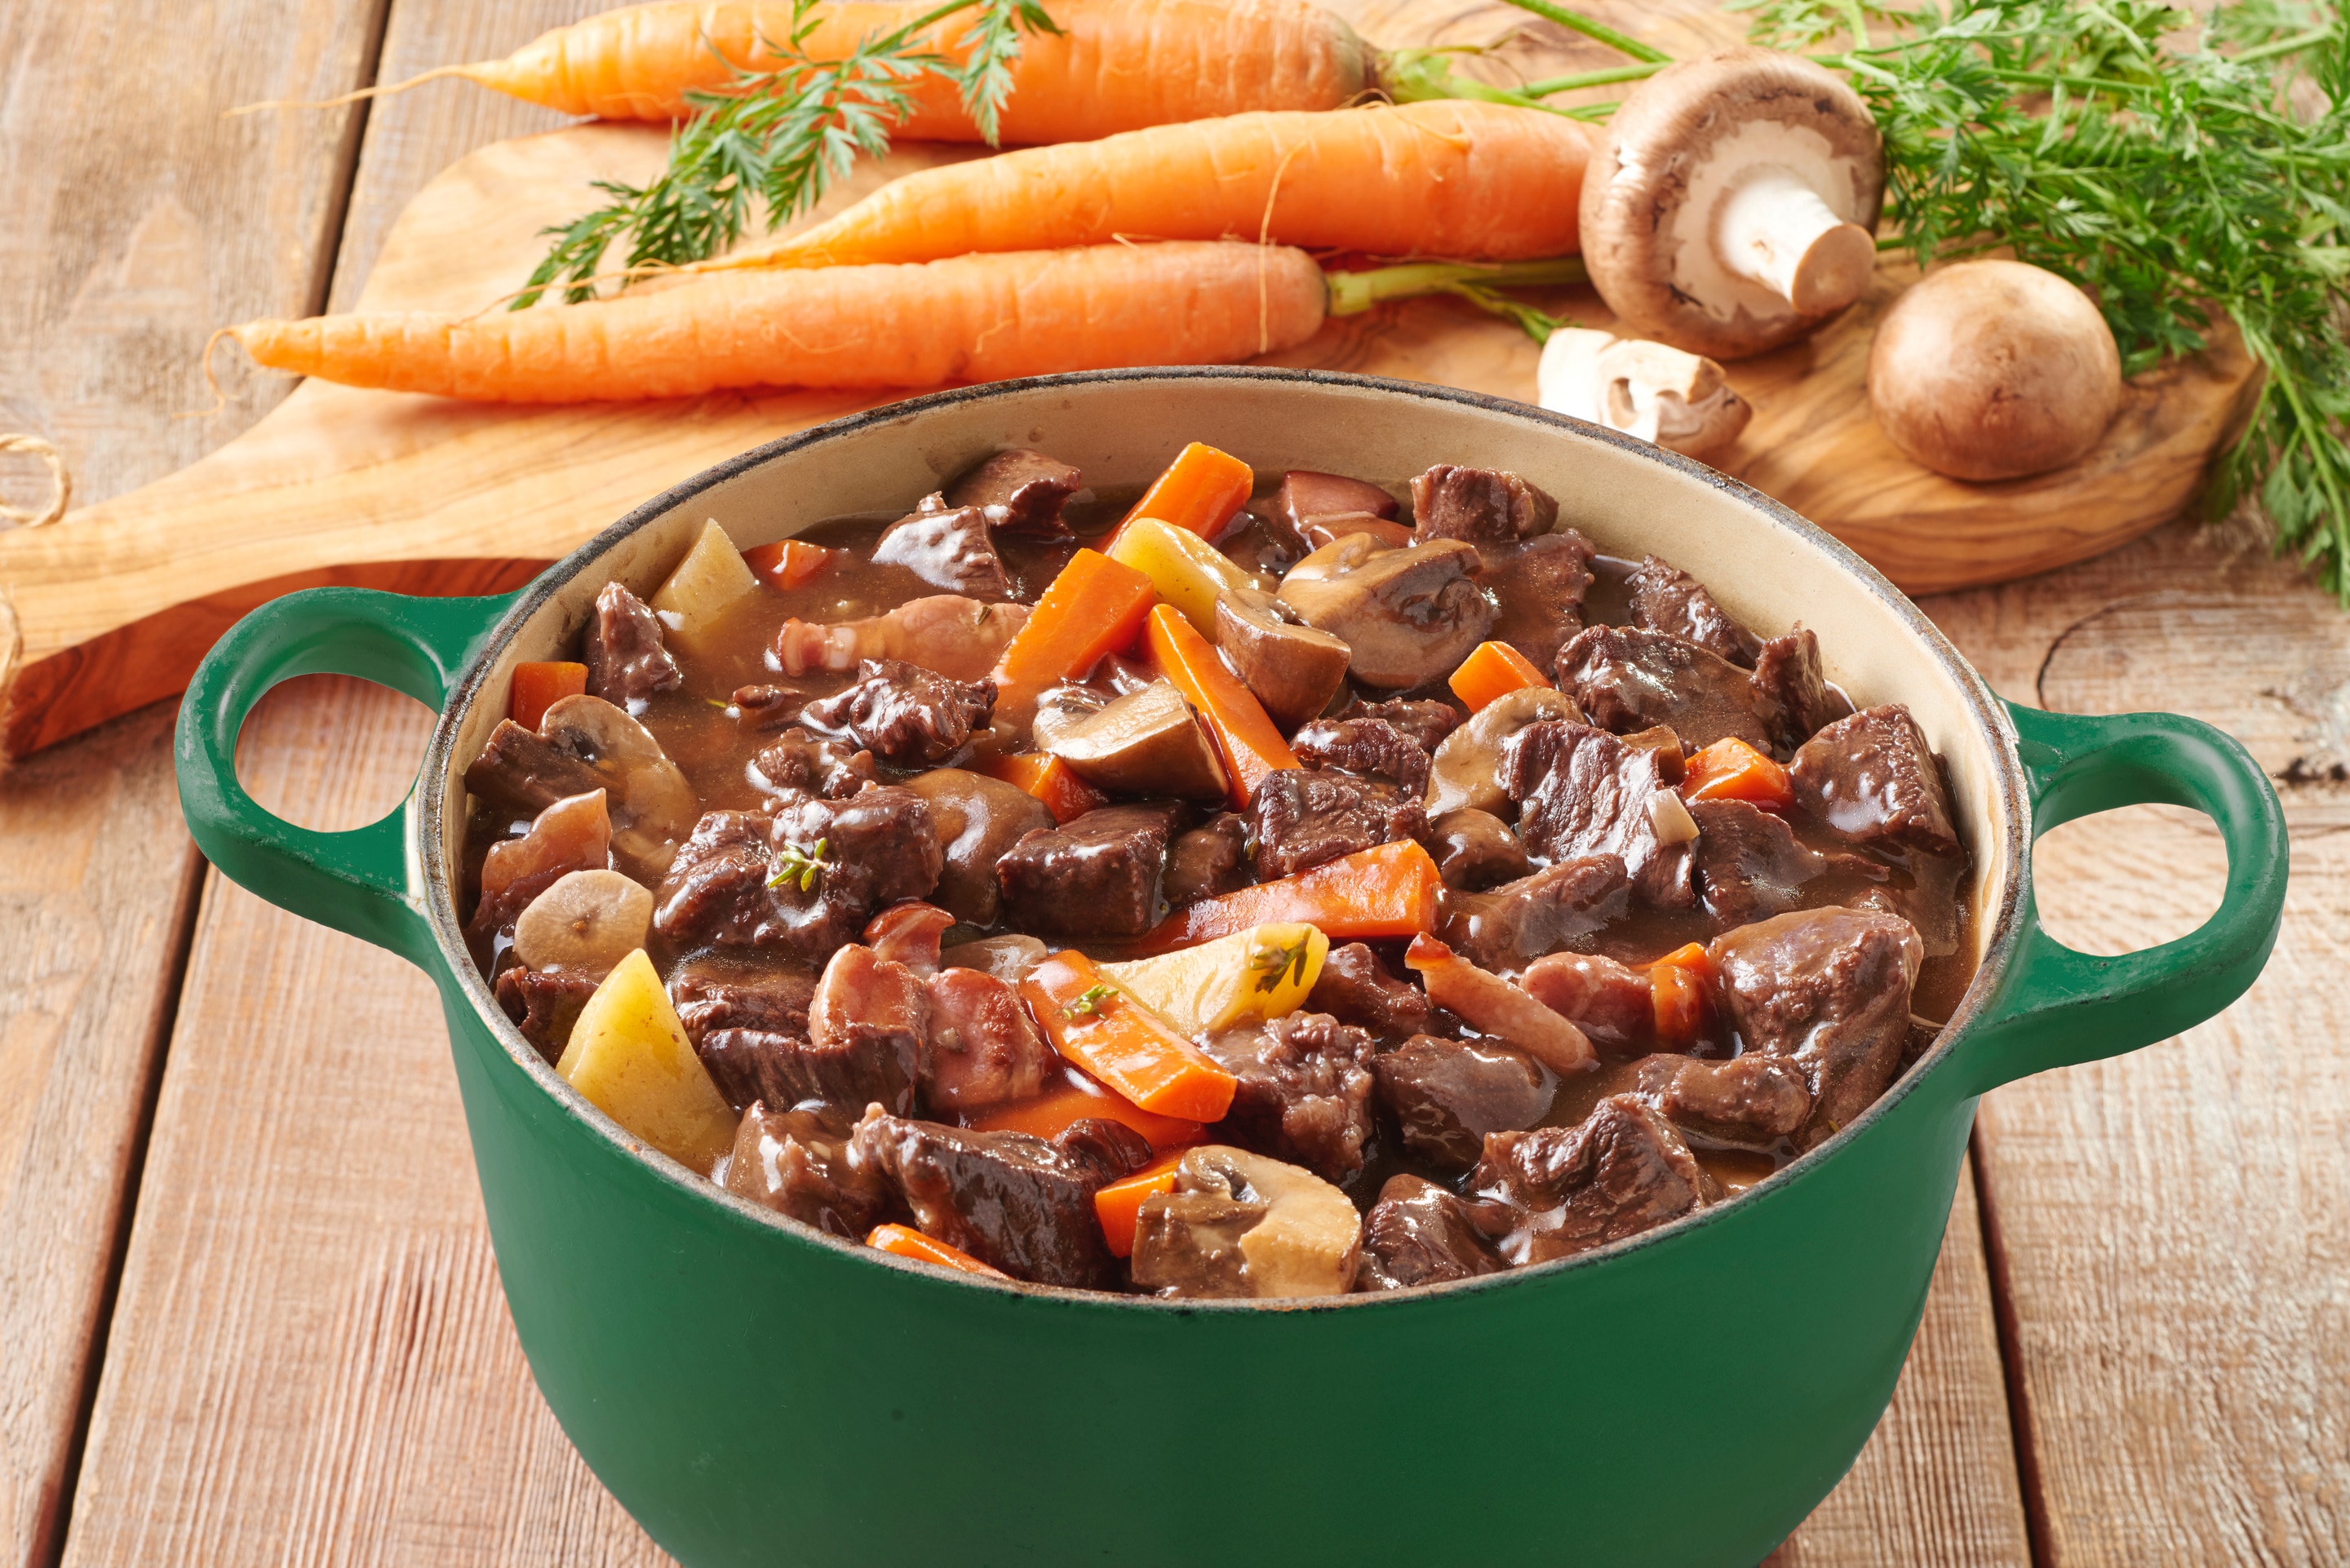 Rich Beef Bourguignon containing carrots, potatoes and mushrooms in an orange casserole pot.  In the background there is carrots and mushrooms on a wooden chopping board